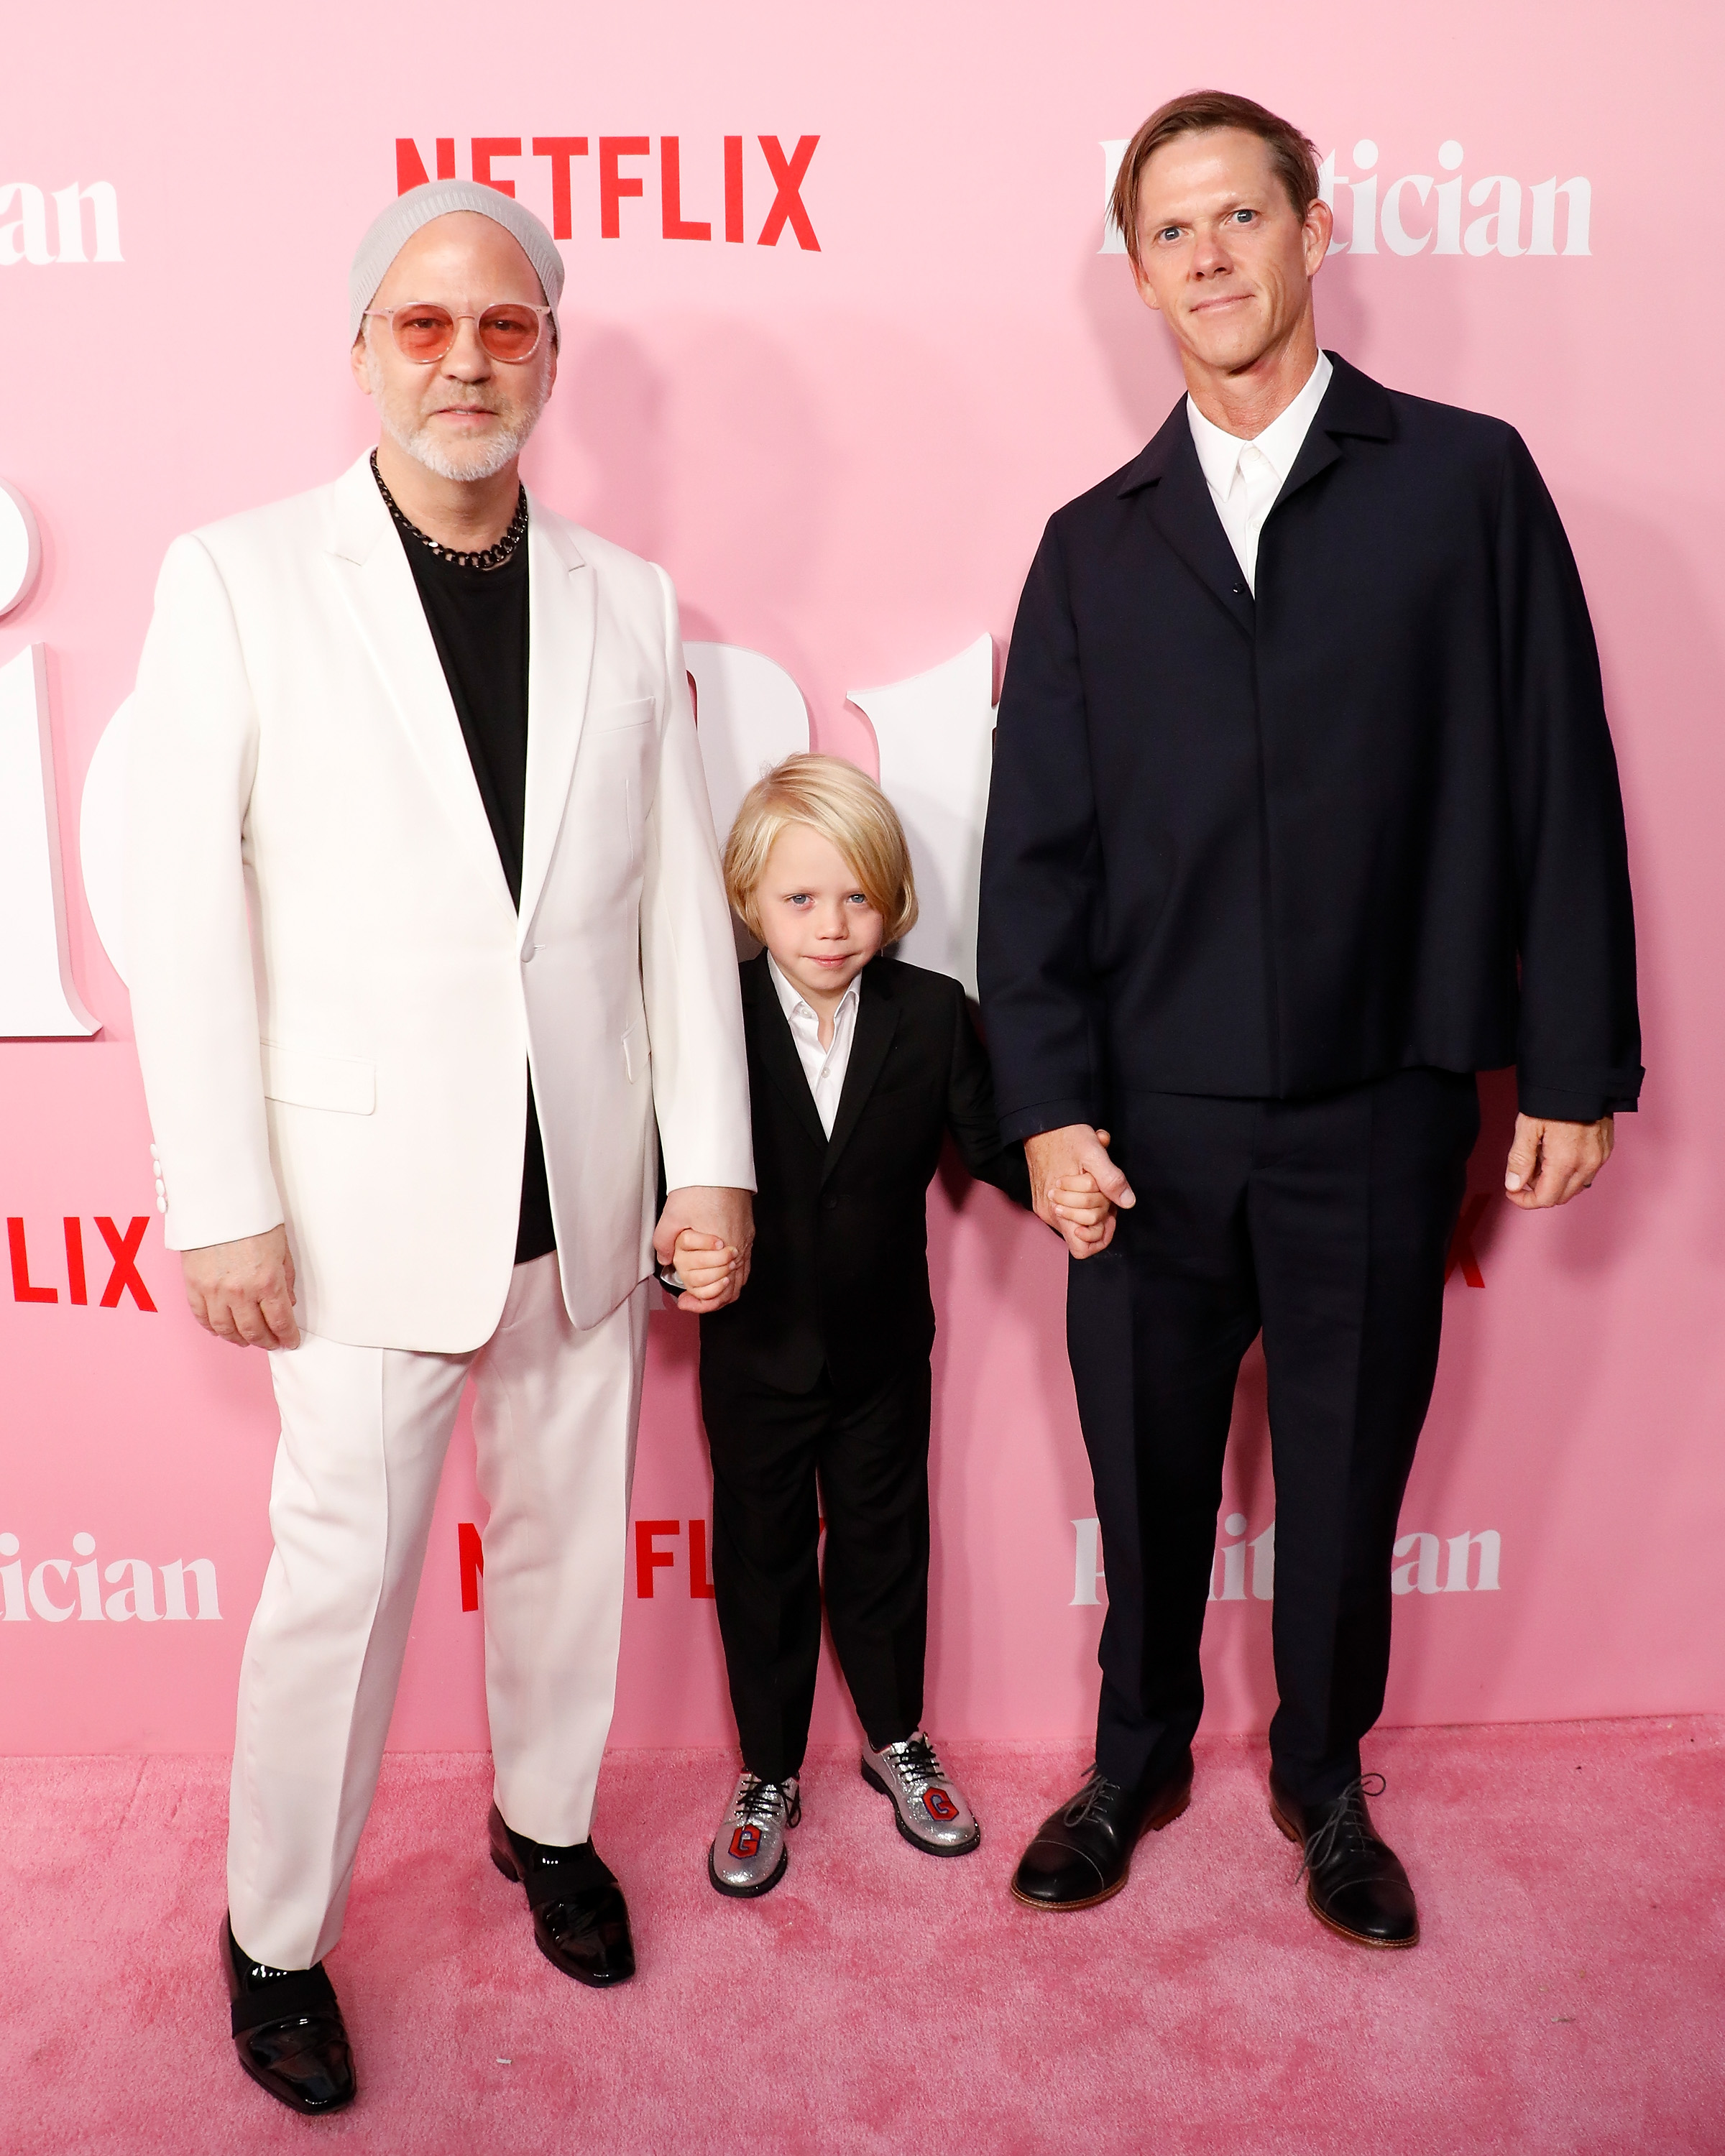 Ryan Murphy and David Miller attend the premiere of Netflix’s “The Politician” with their oldest son Logan Miller at DGA Theater on September 26, 2019, in New York City